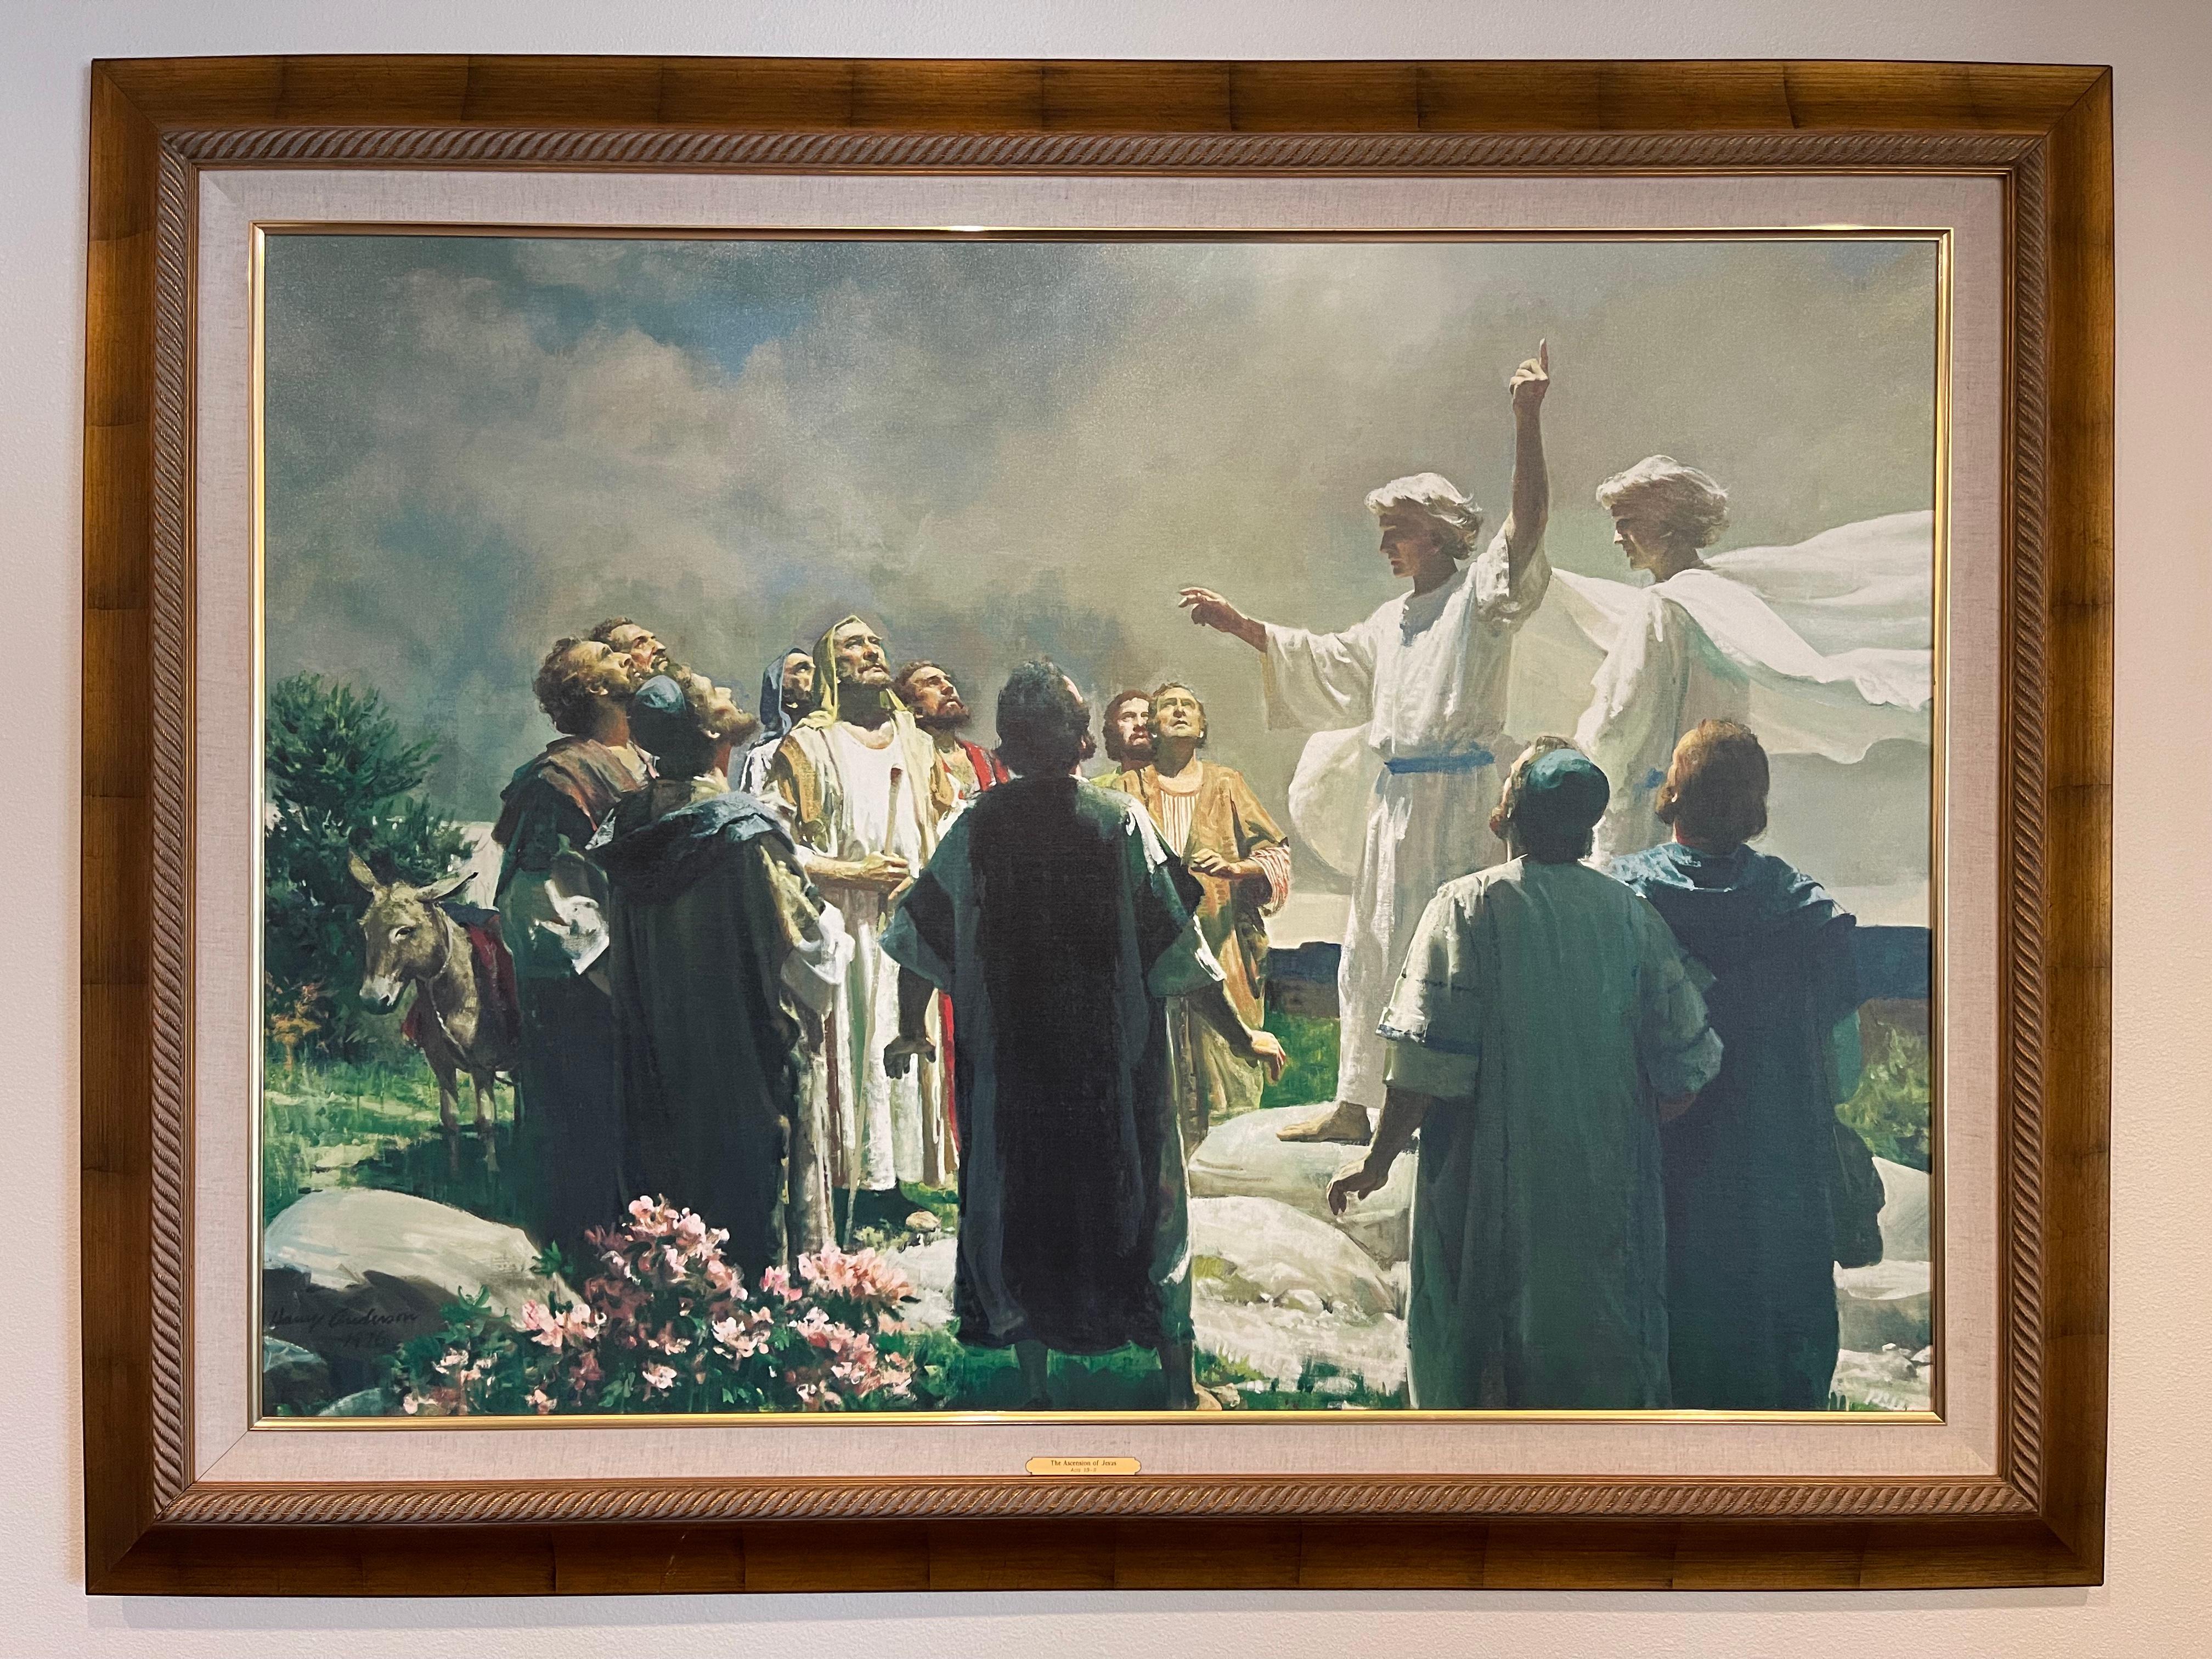 The Ascension of Jesus by Harry Anderson - Acts 1:9–11